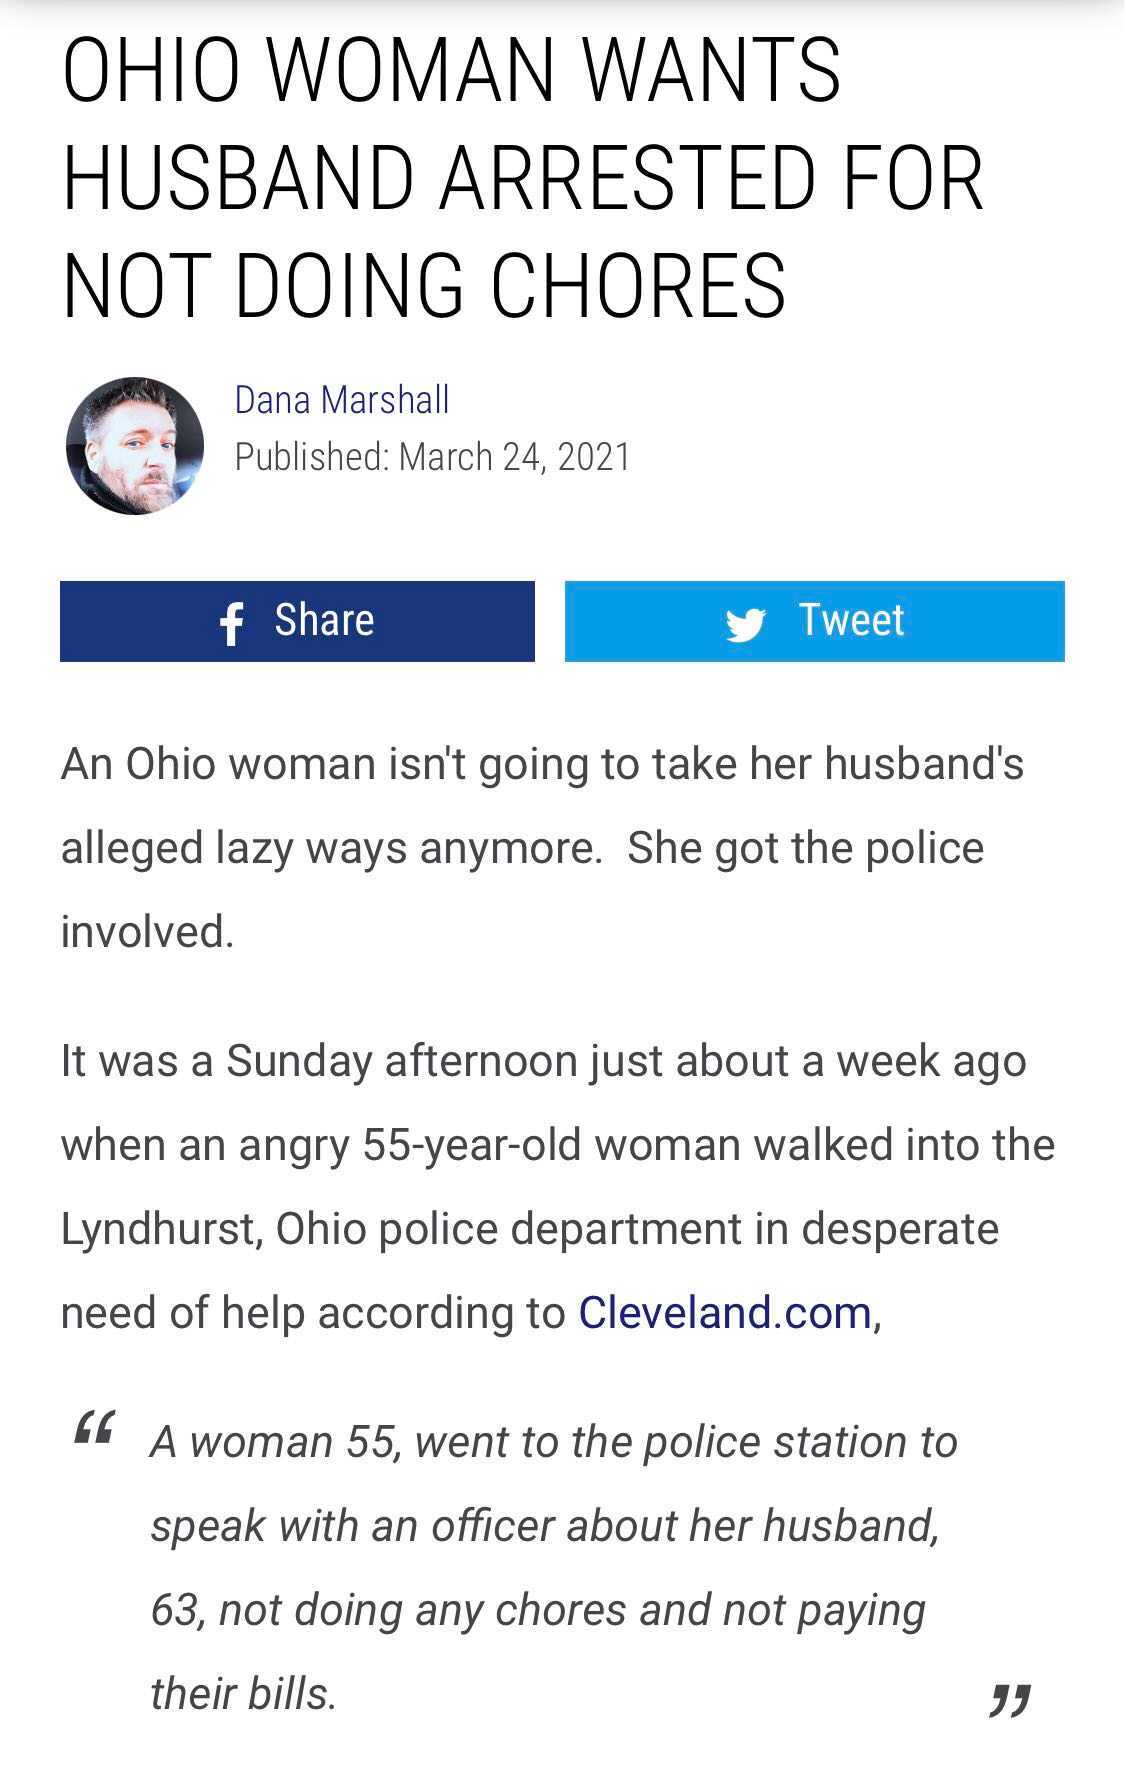 document - Ohio Woman Wants Husband Arrested For Not Doing Chores Dana Marshall Published f Tweet An Ohio woman isn't going to take her husband's alleged lazy ways anymore. She got the police involved. It was a Sunday afternoon just about a week ago when 